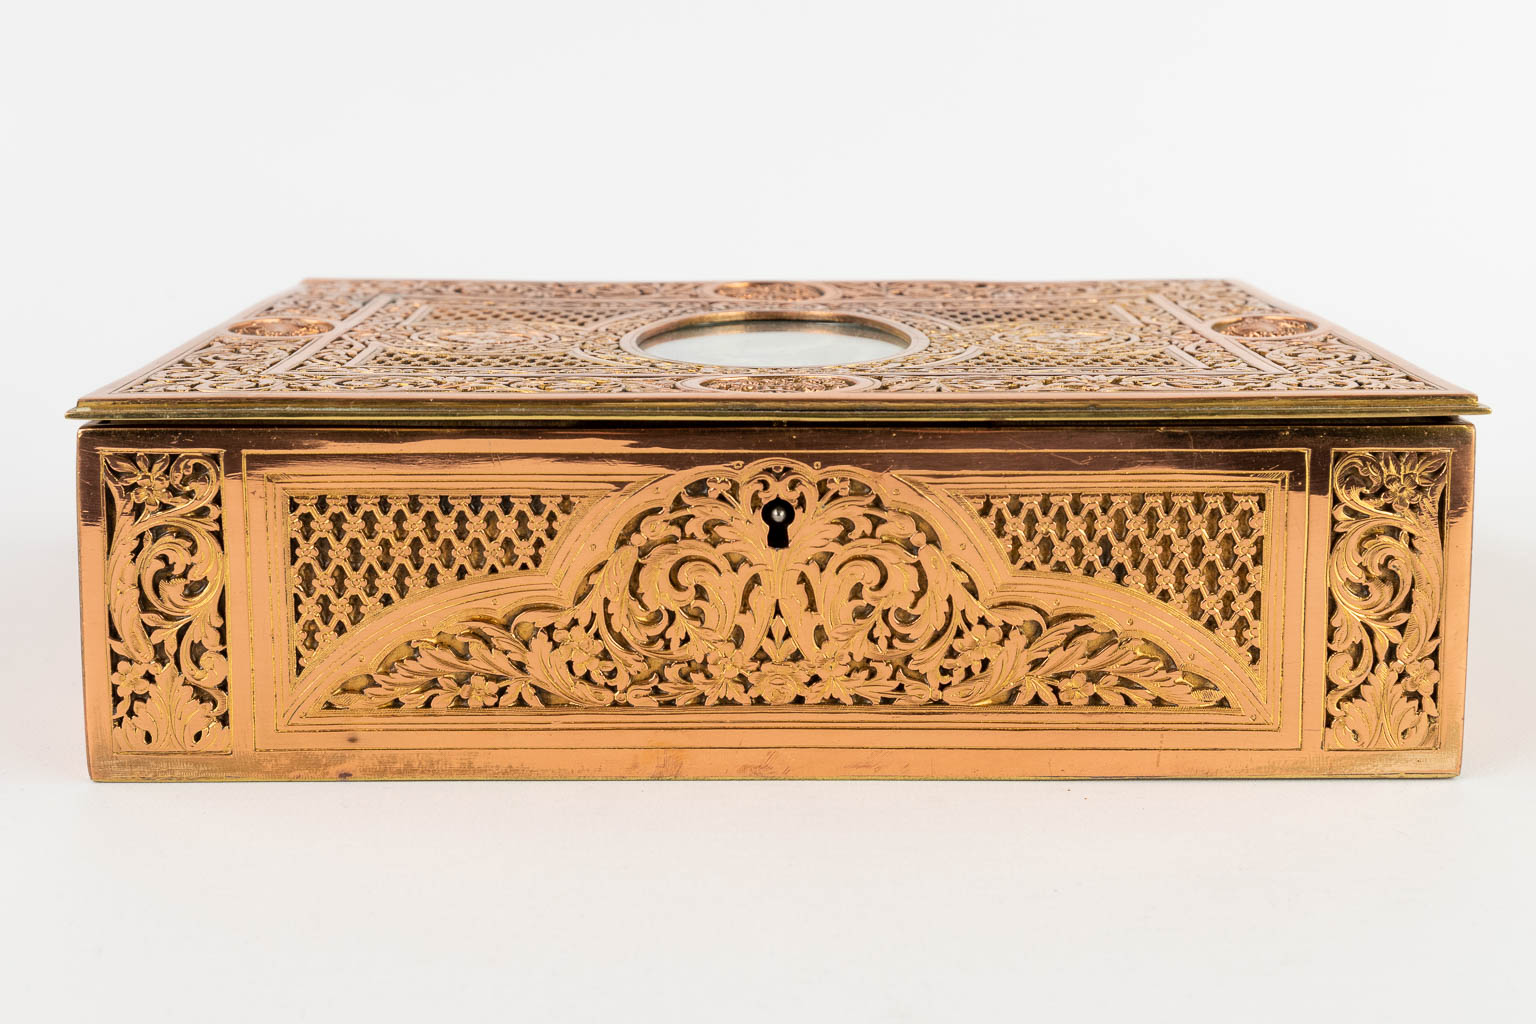 A jewellery box, ajoured brass and finished with a miniature painting. (D:16,7 x W:23 x H:6,5 cm)